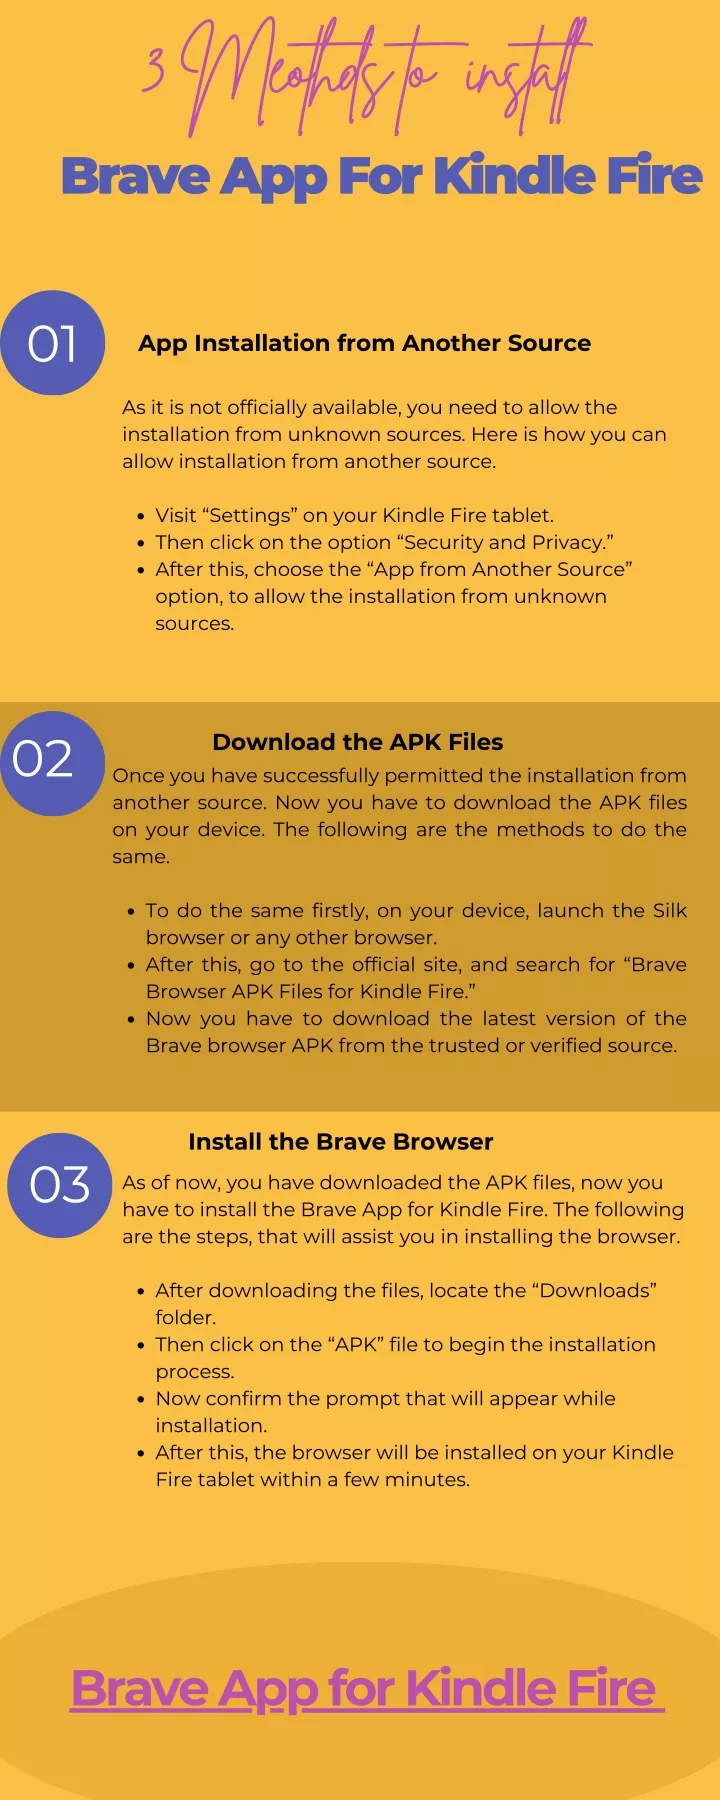 3 meothds to install brave app for kindle fire